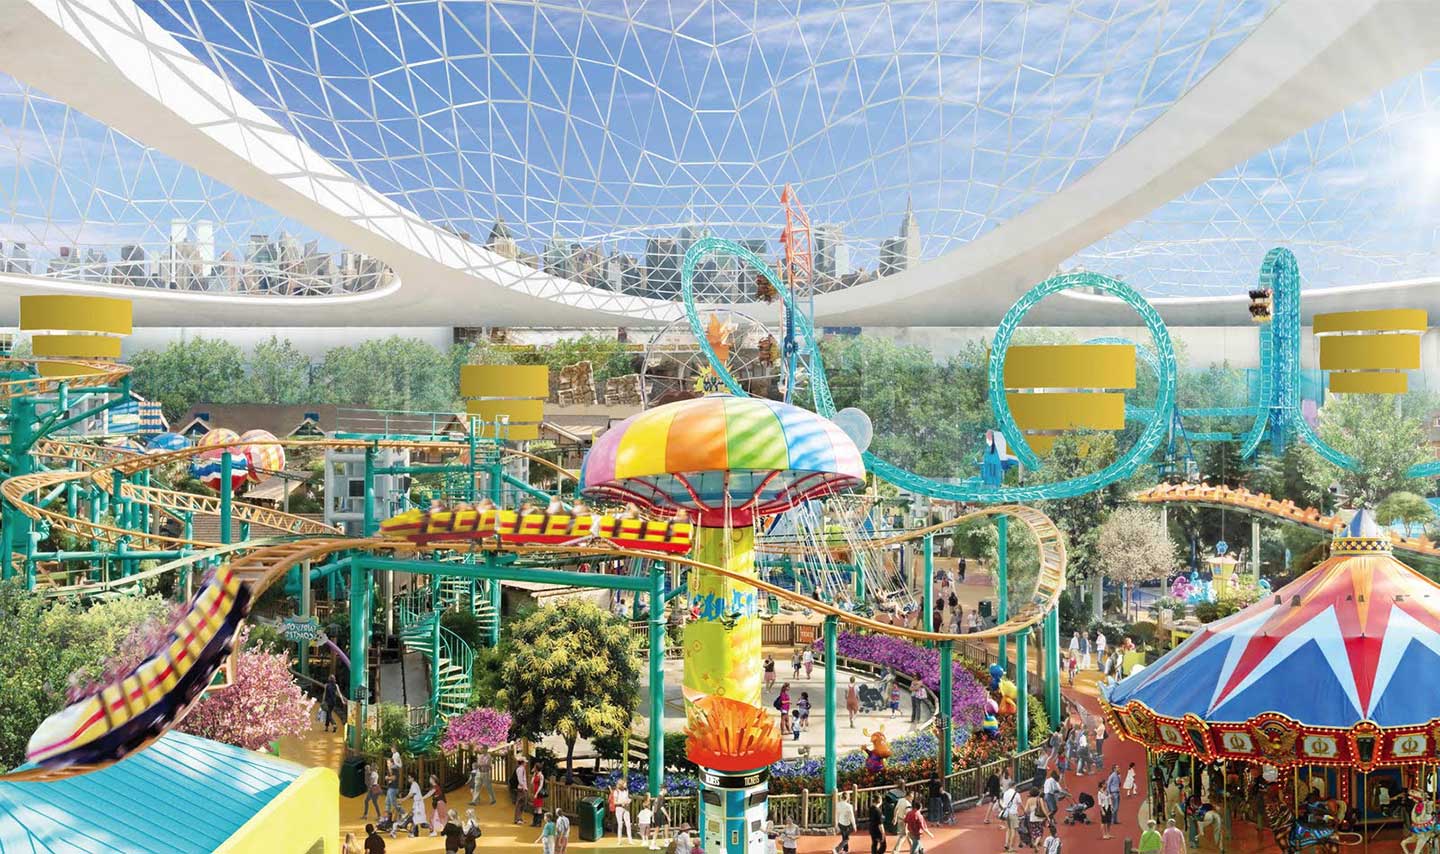 Get A Taste Of Nostalgia At The All New Nickelodeon Universe Indoor Theme Park